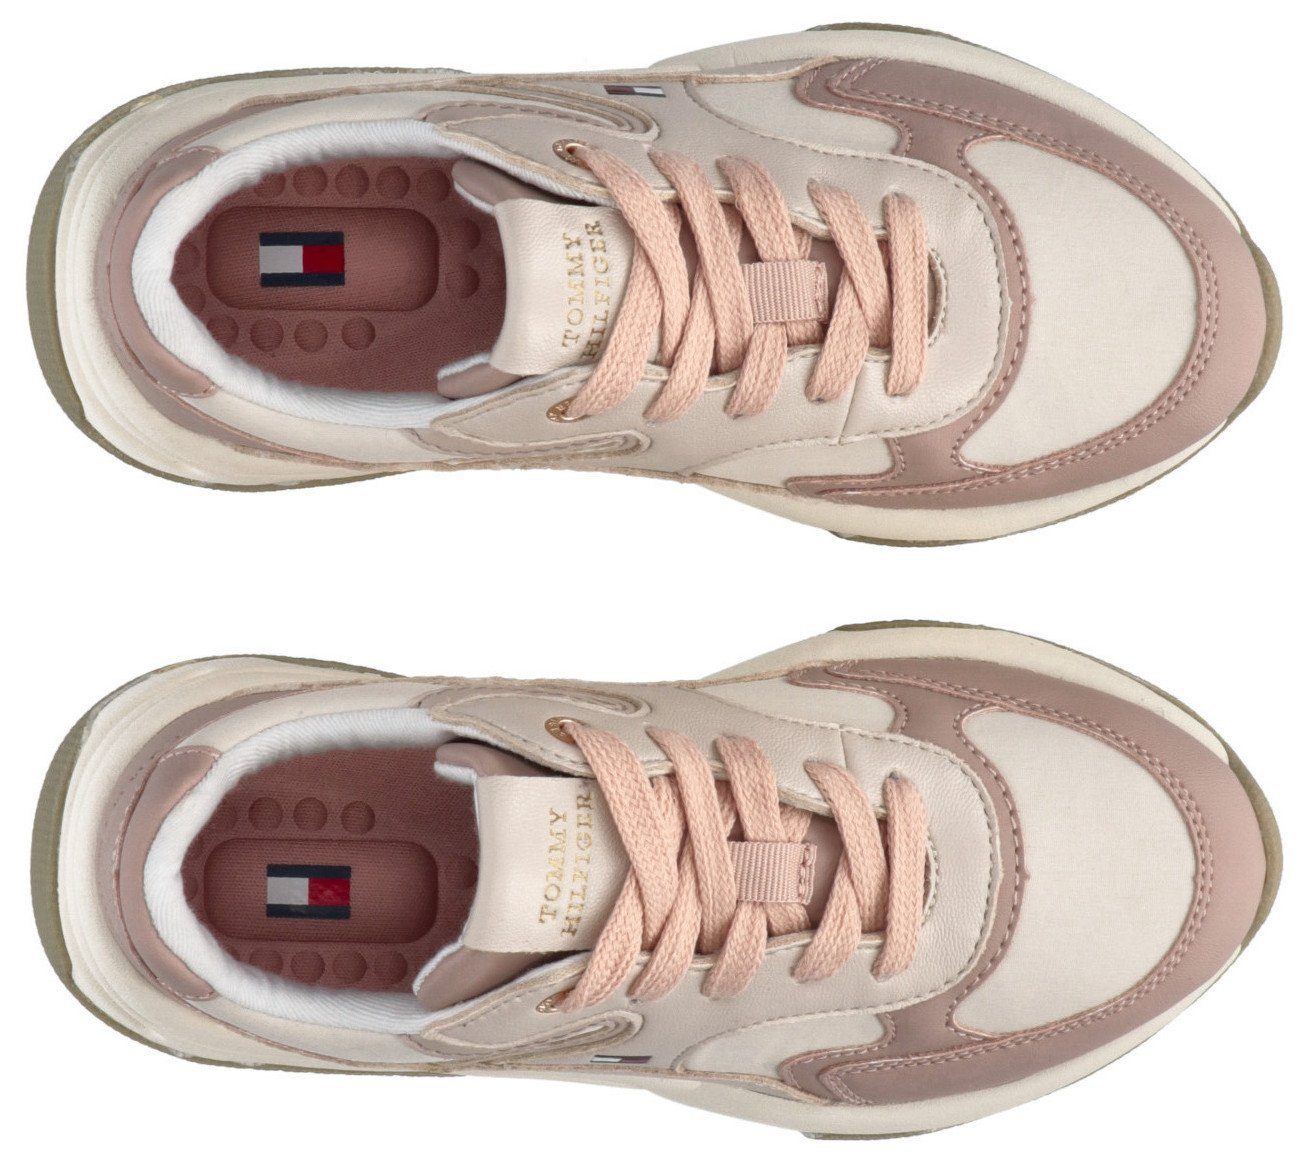 Plateausneaker mit CUT Tommy SNEAKER LACE-UP Hilfiger LOW Chunky modischer Sohle